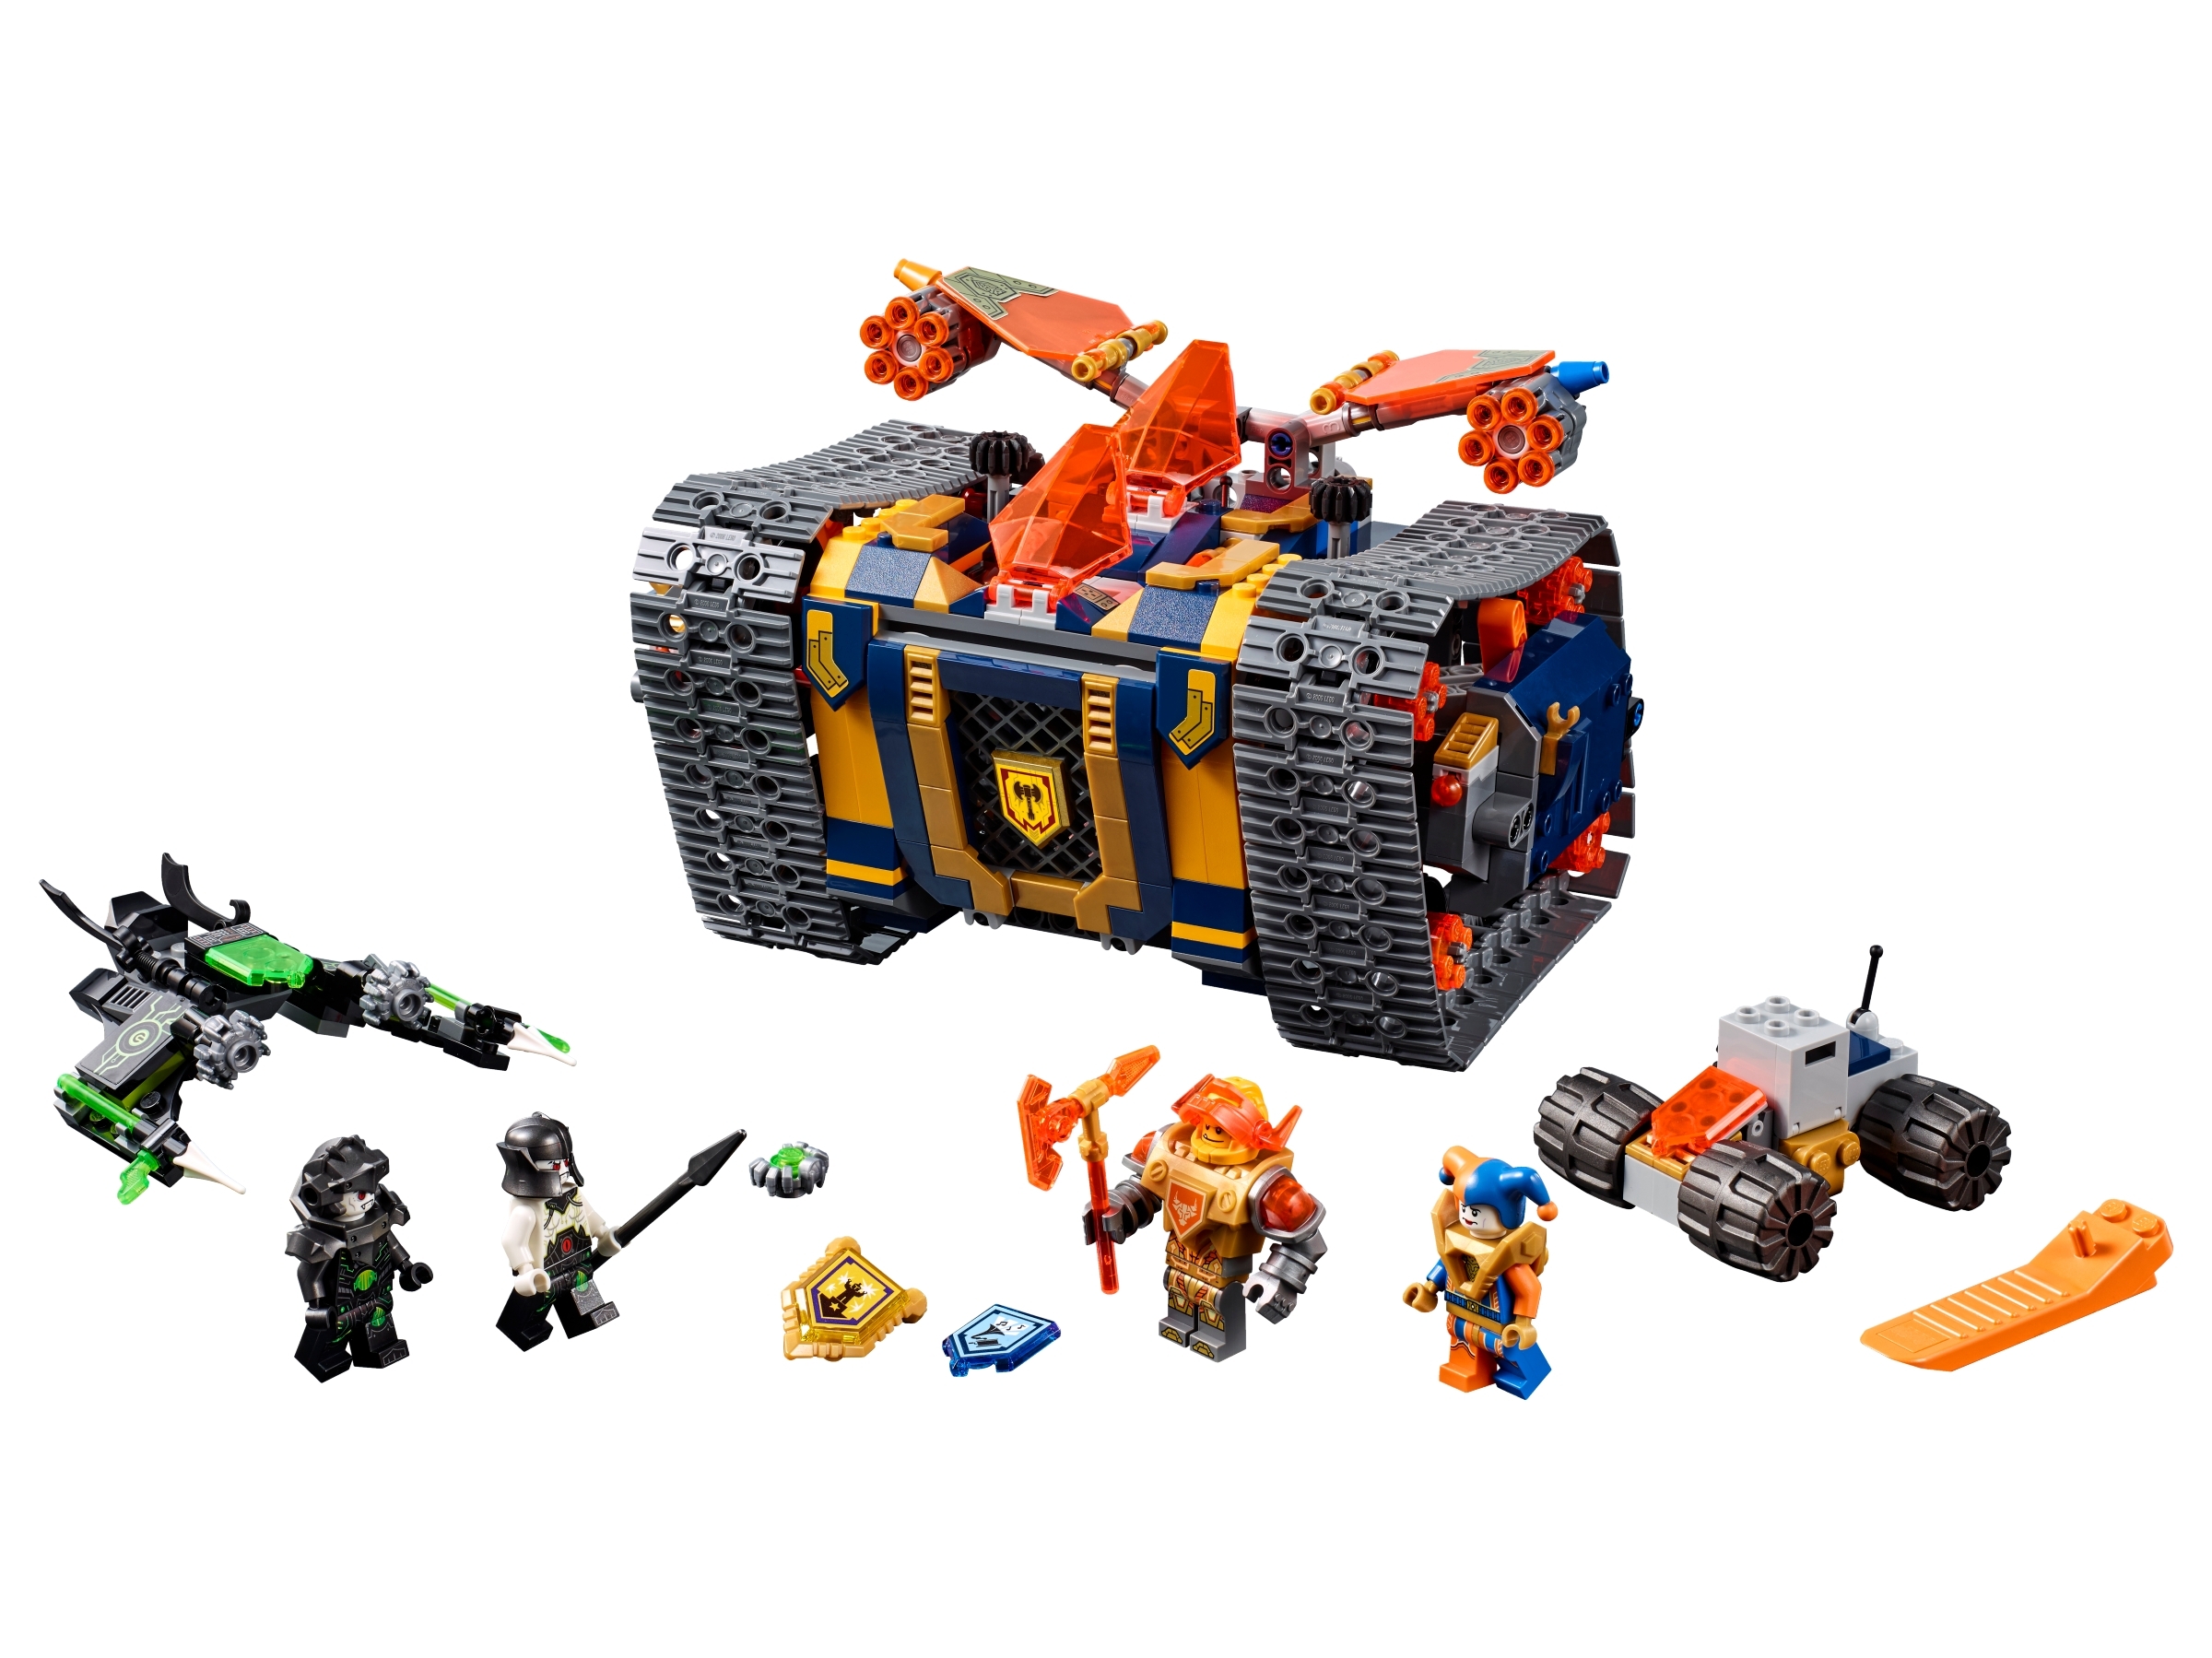 Axl's Rolling Arsenal 72006 | NEXO KNIGHTS™ | Buy online at Official LEGO® Shop US